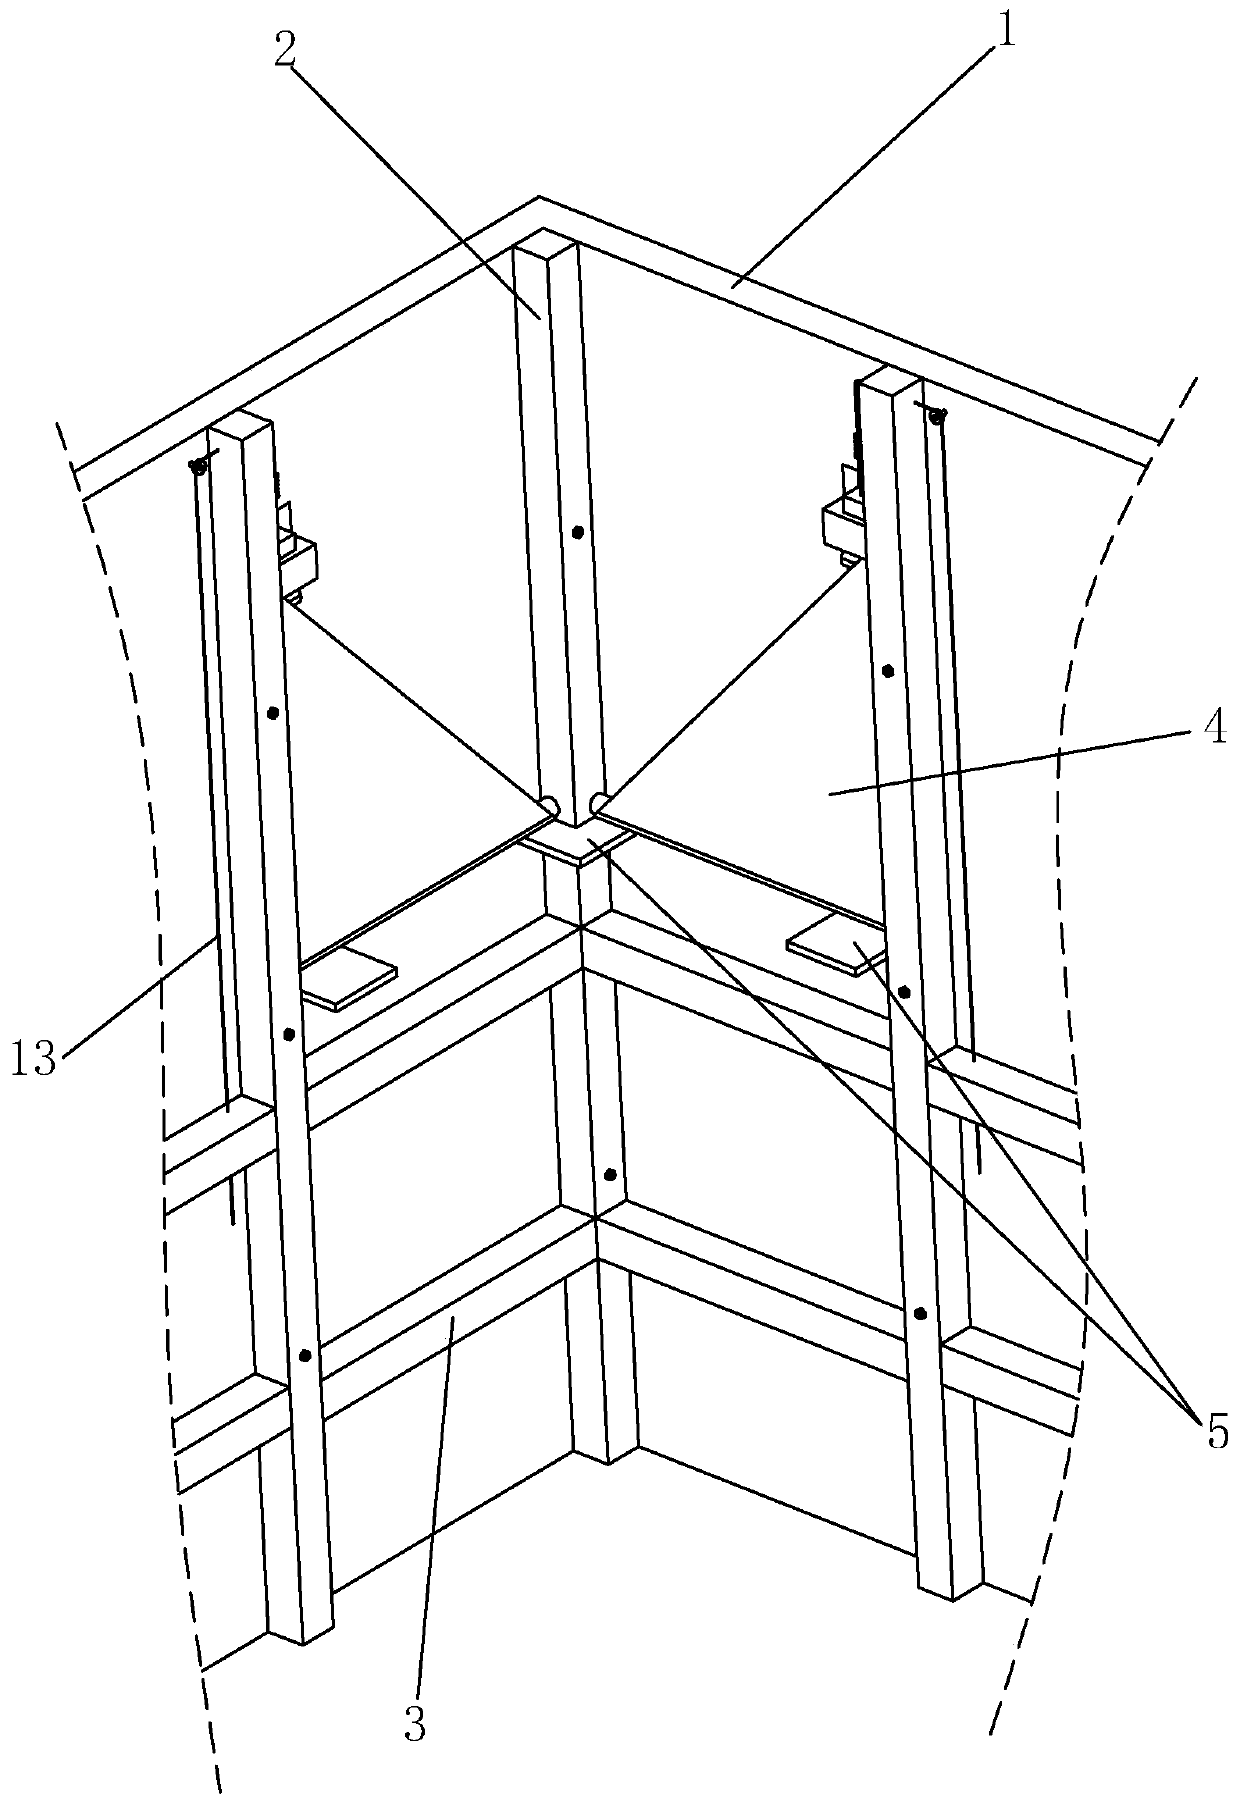 A safe anti-seismic structure in an antique building